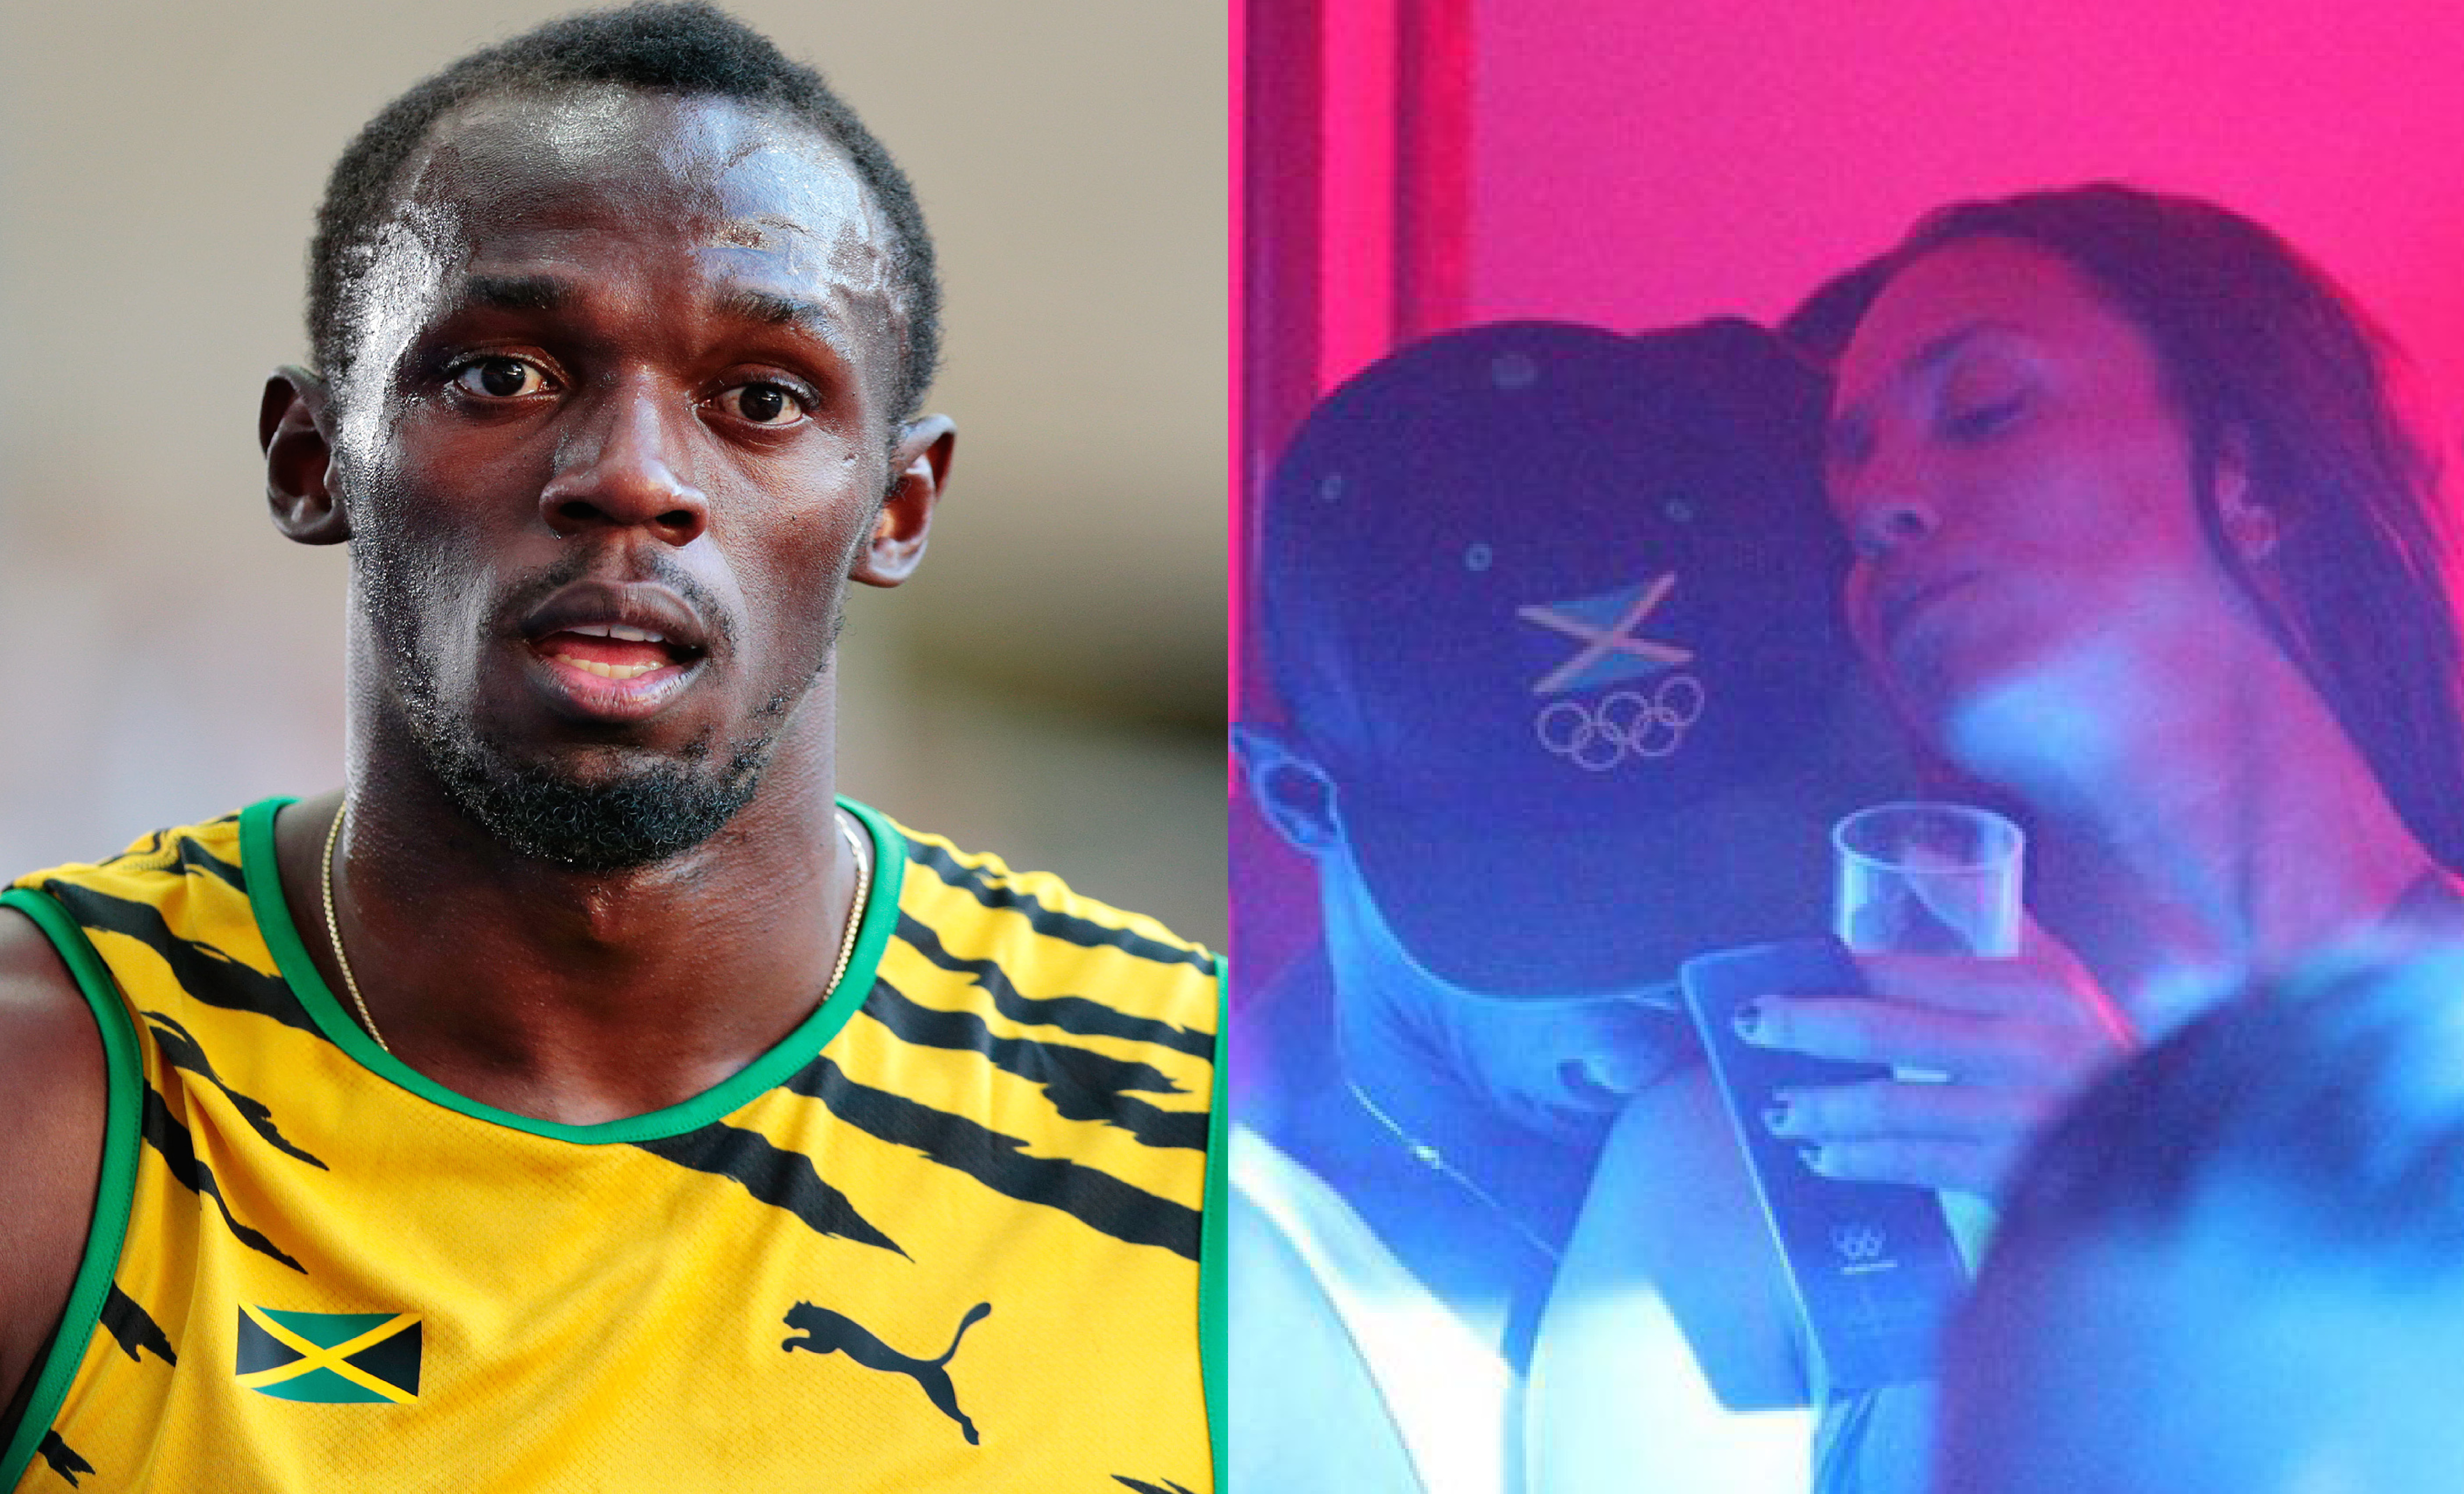 Photos Show Usain Bolt Kissing Another Mystery Woman Hours Before 